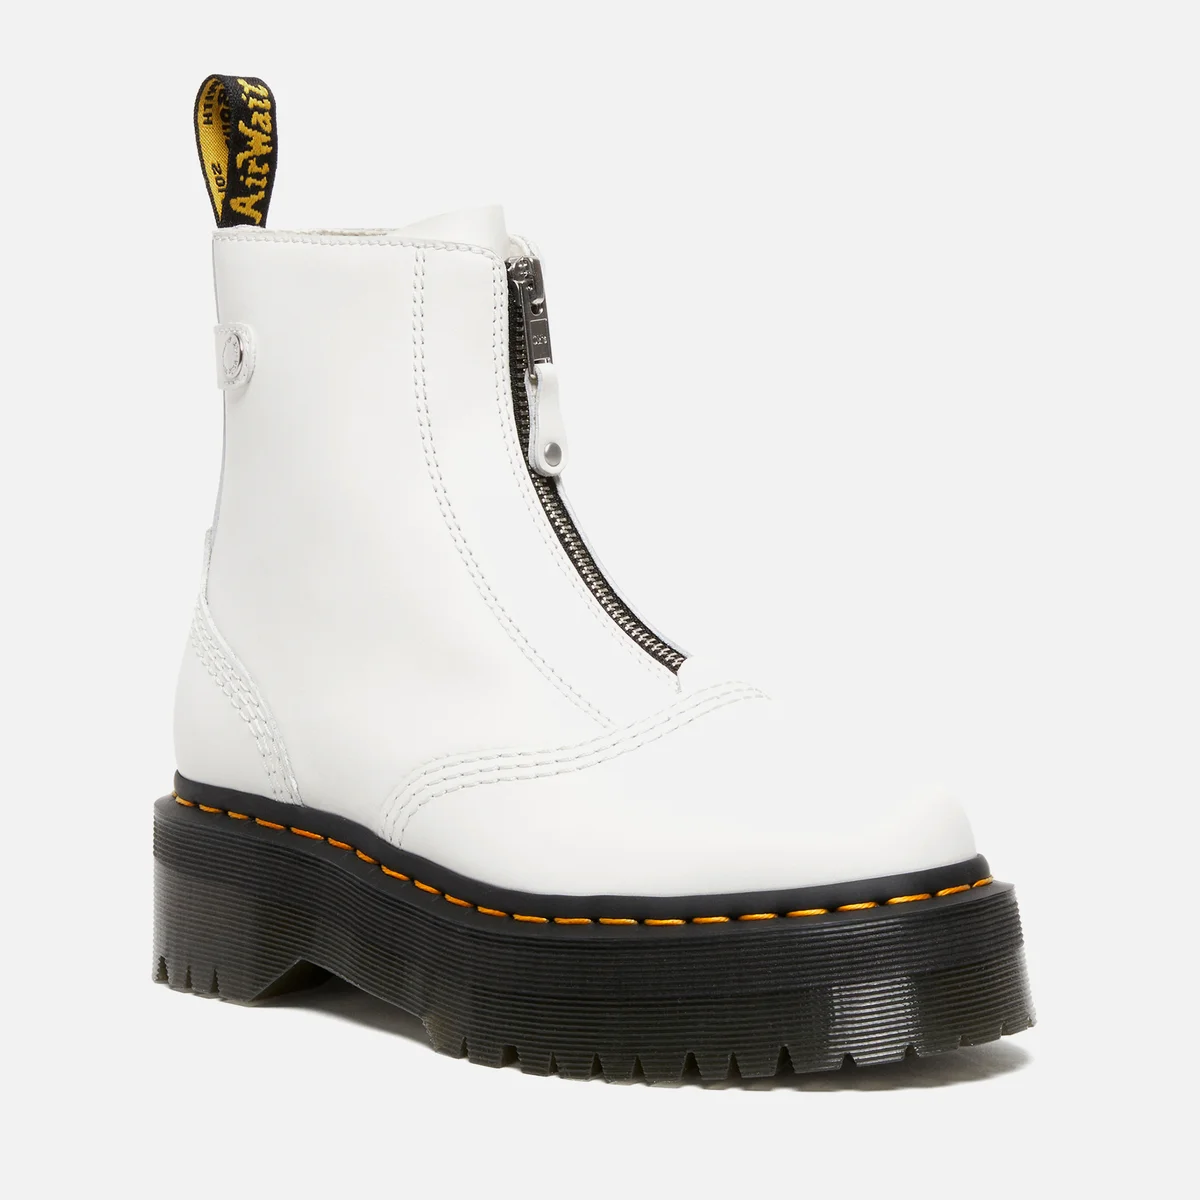 Dr. Martens Jetta Leather Boots Image 1